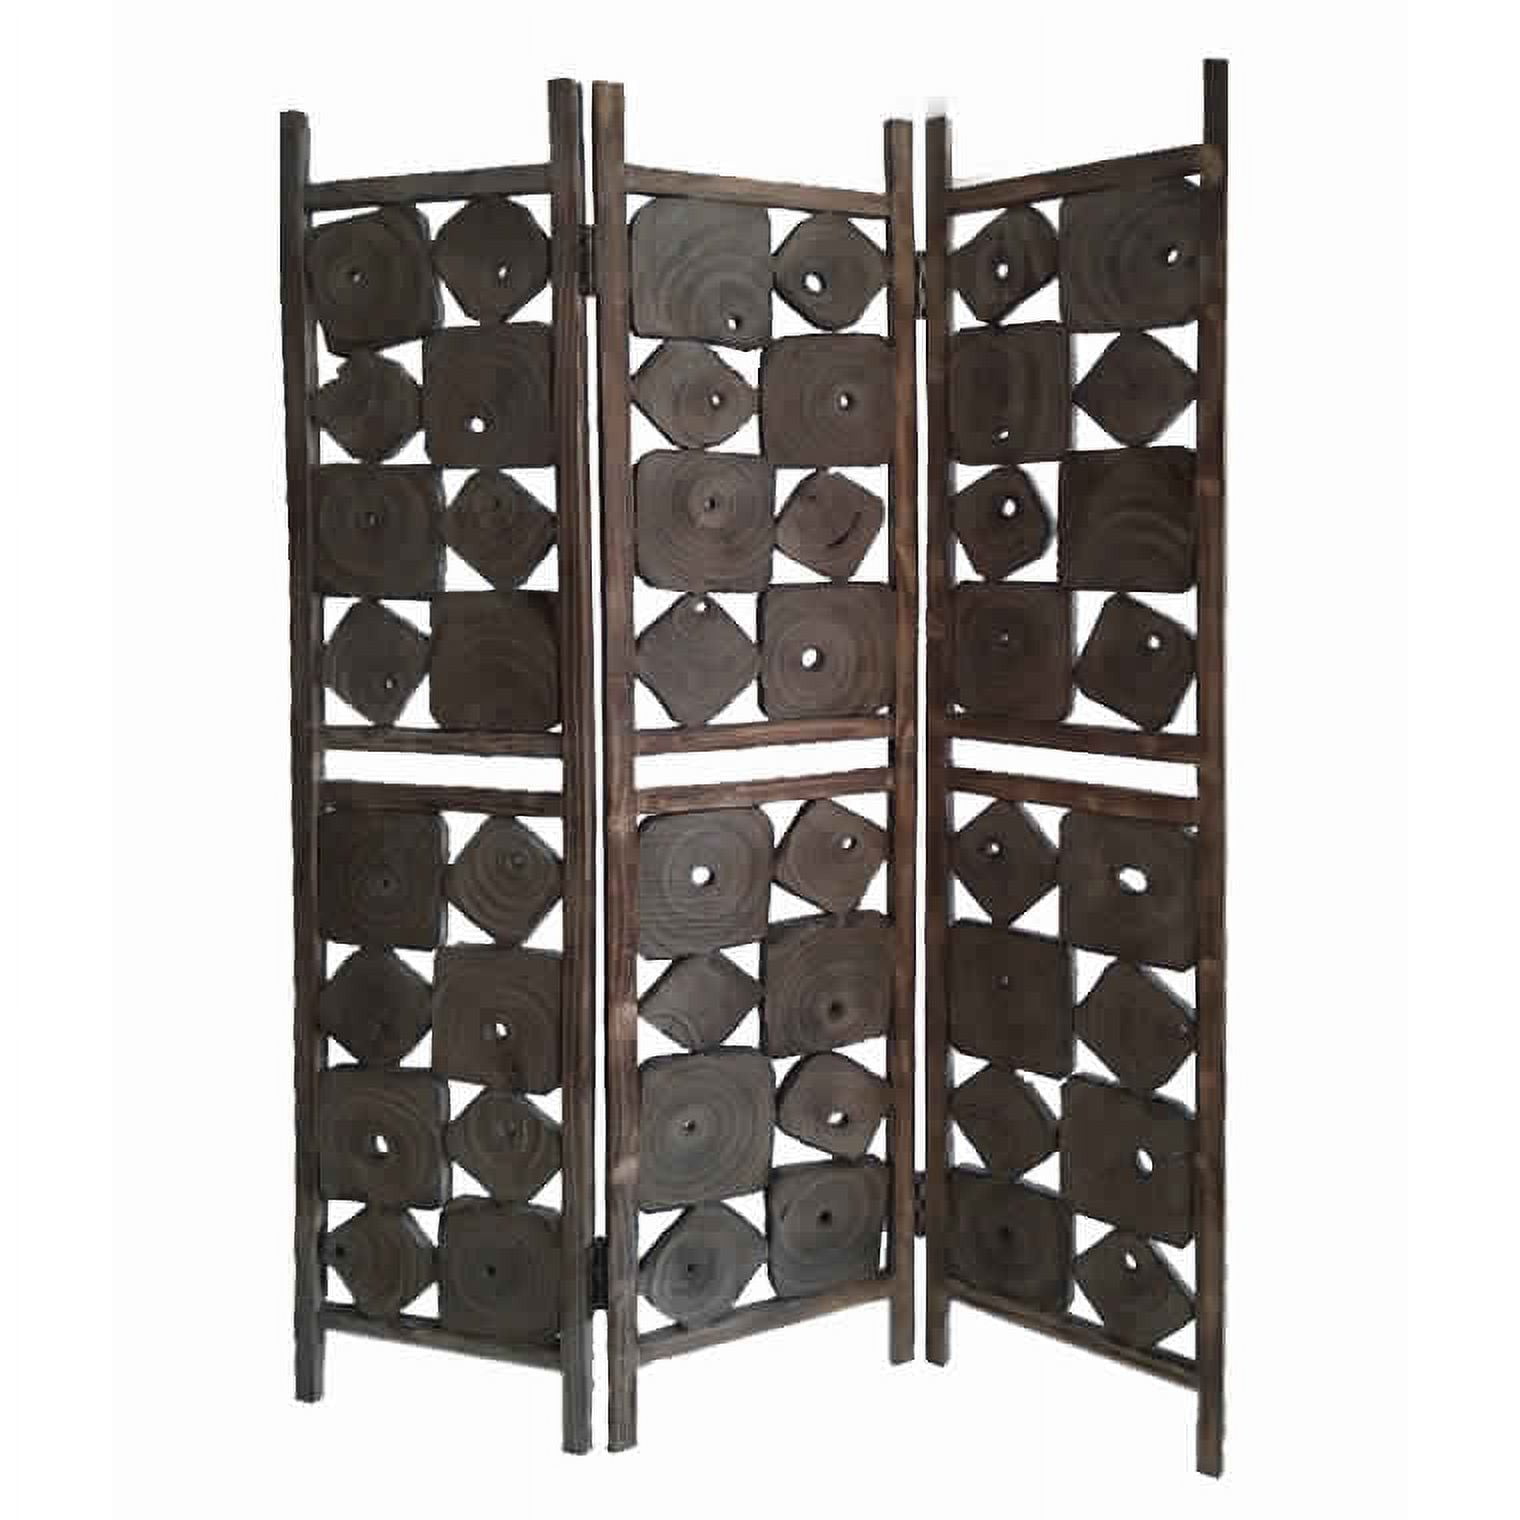 Bm205887 Contemporary 3 Panel Wooden Screen With Square Log Cut Inset, Brown